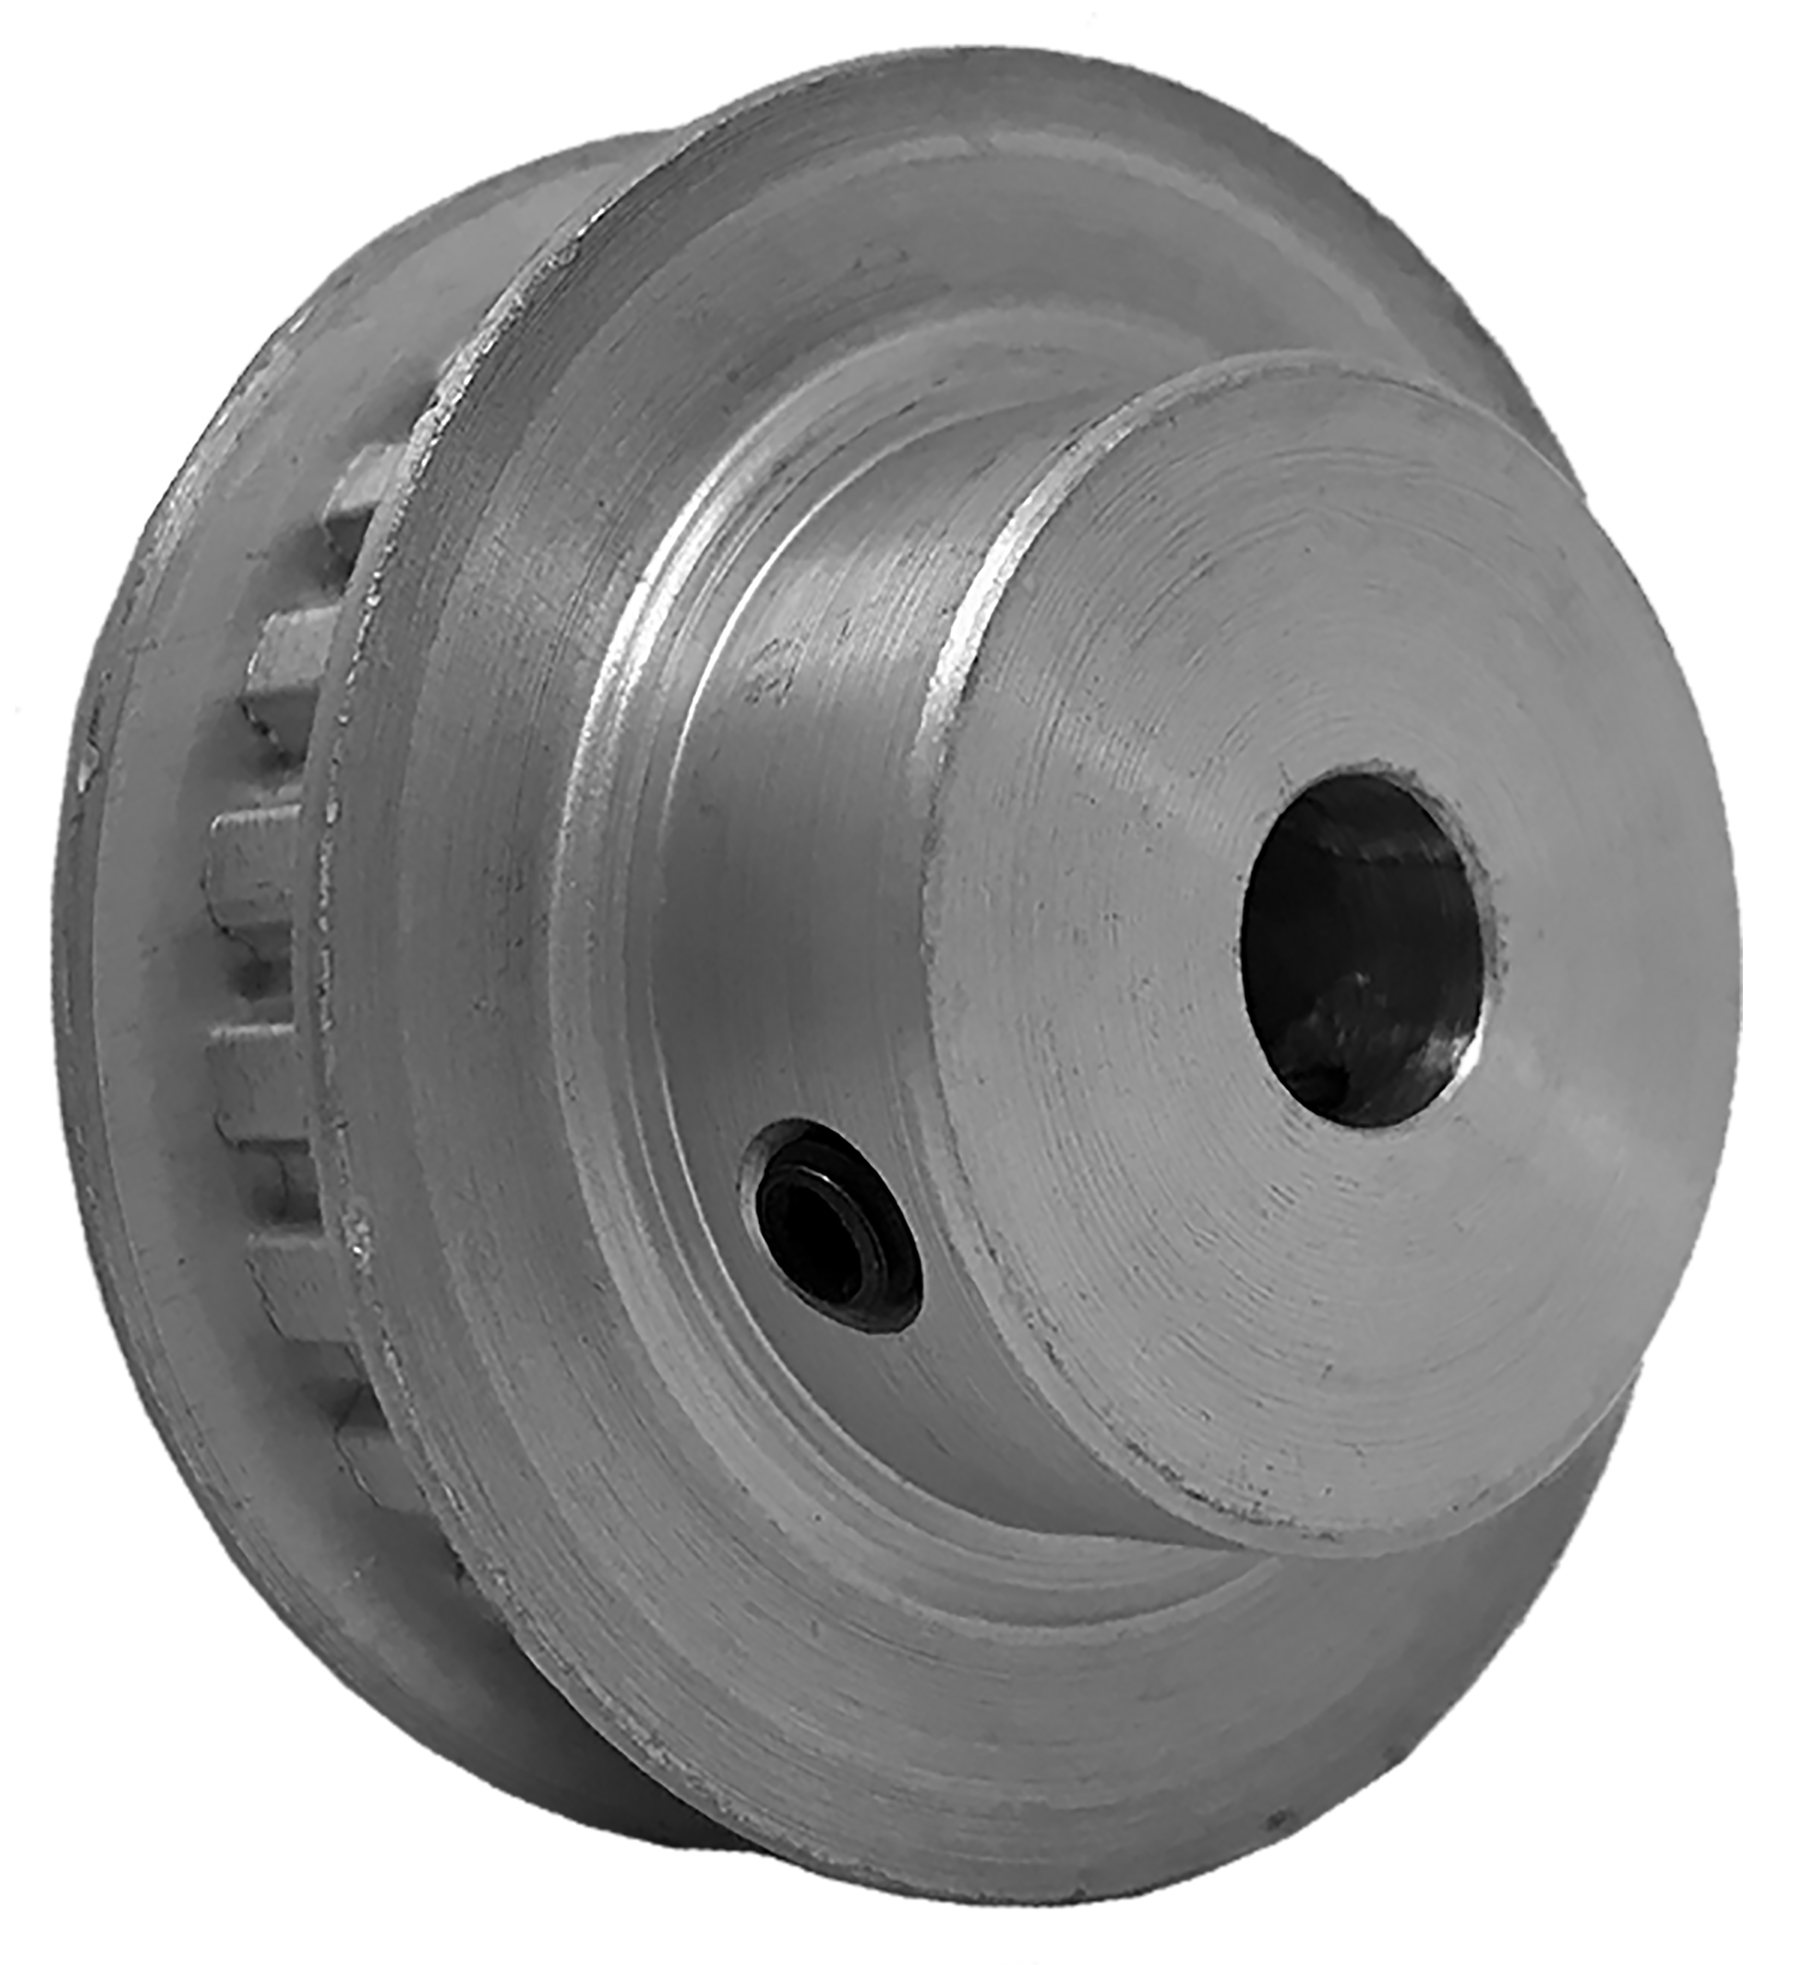 24XL025-6FA4 - Aluminum Imperial Pitch Pulleys